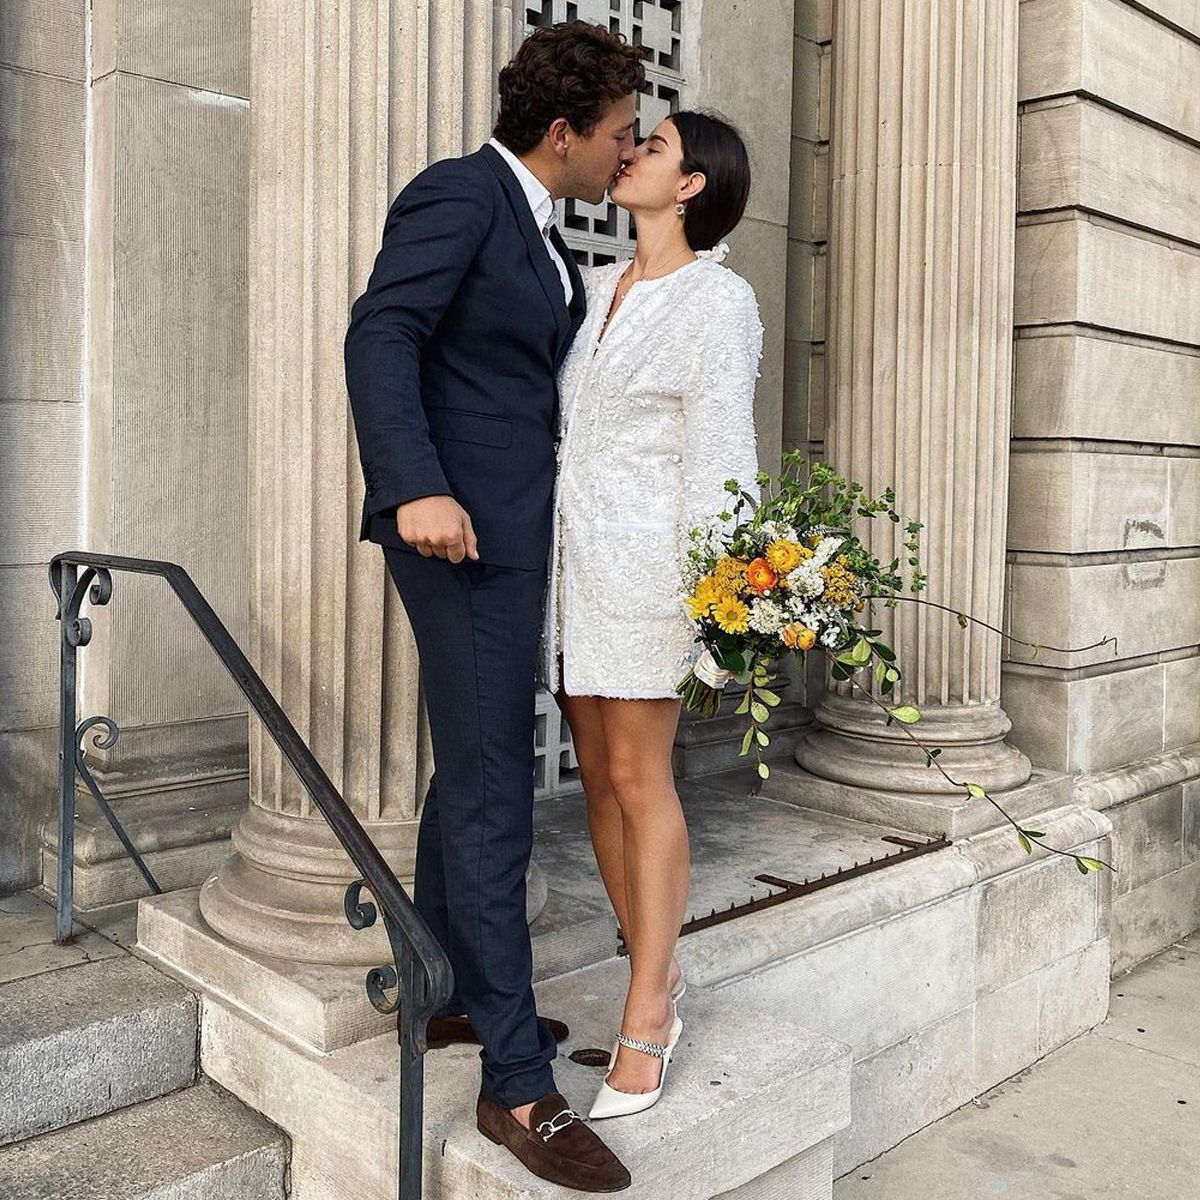 These Small Wedding Ceremony Outfits Are So Very Chic